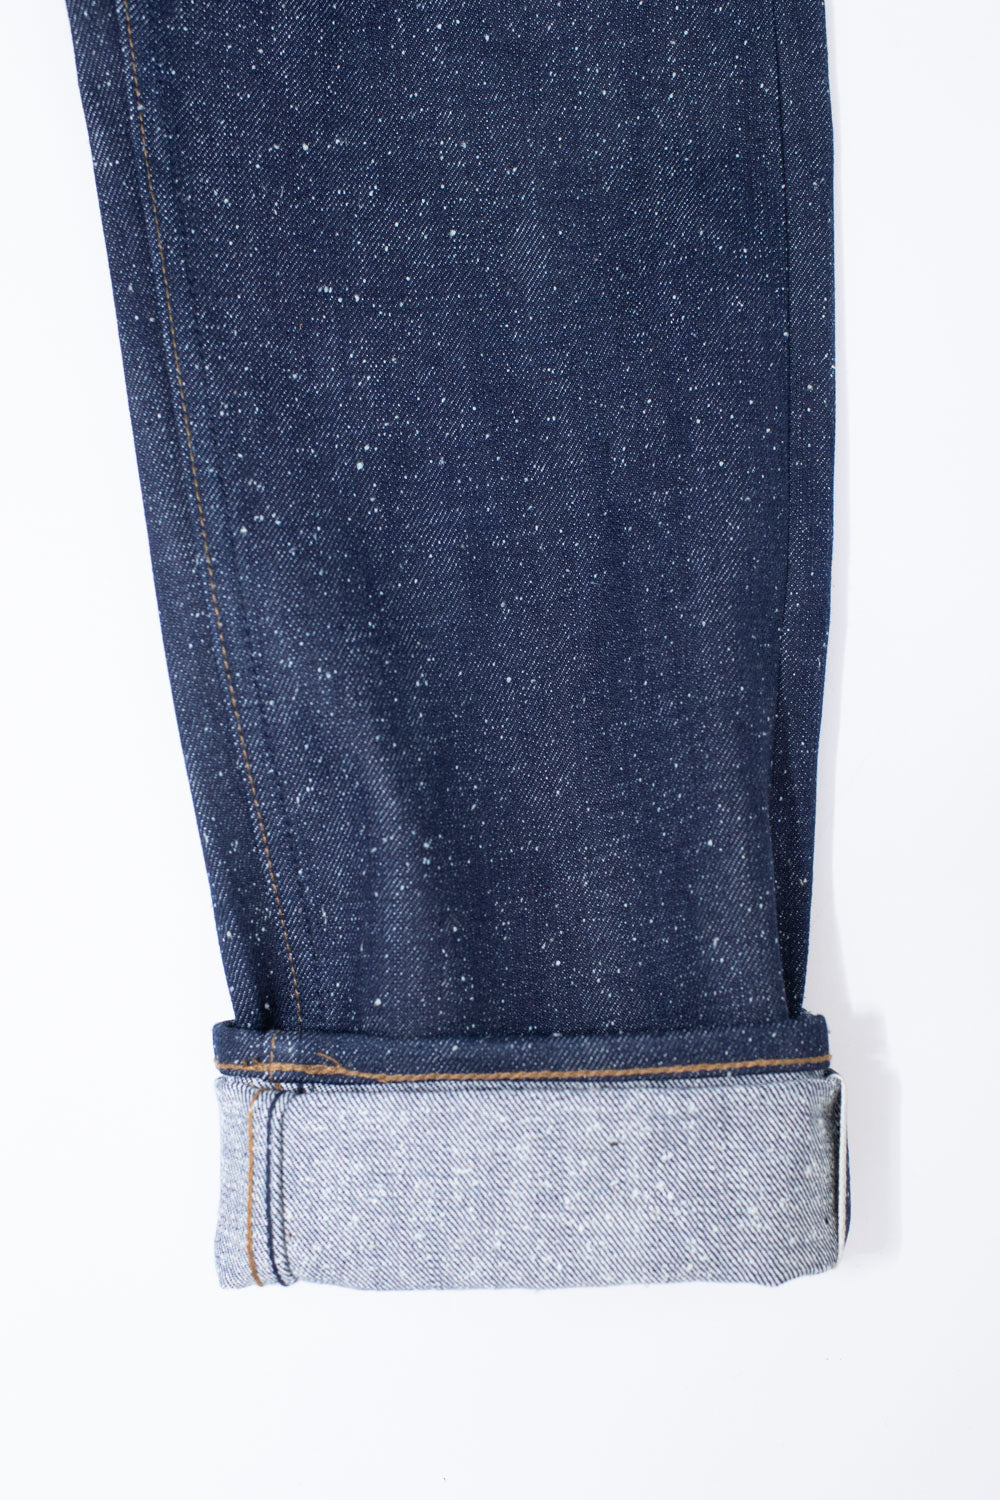 UB243 - 18oz Neppy Selvedge - Tapered Fit